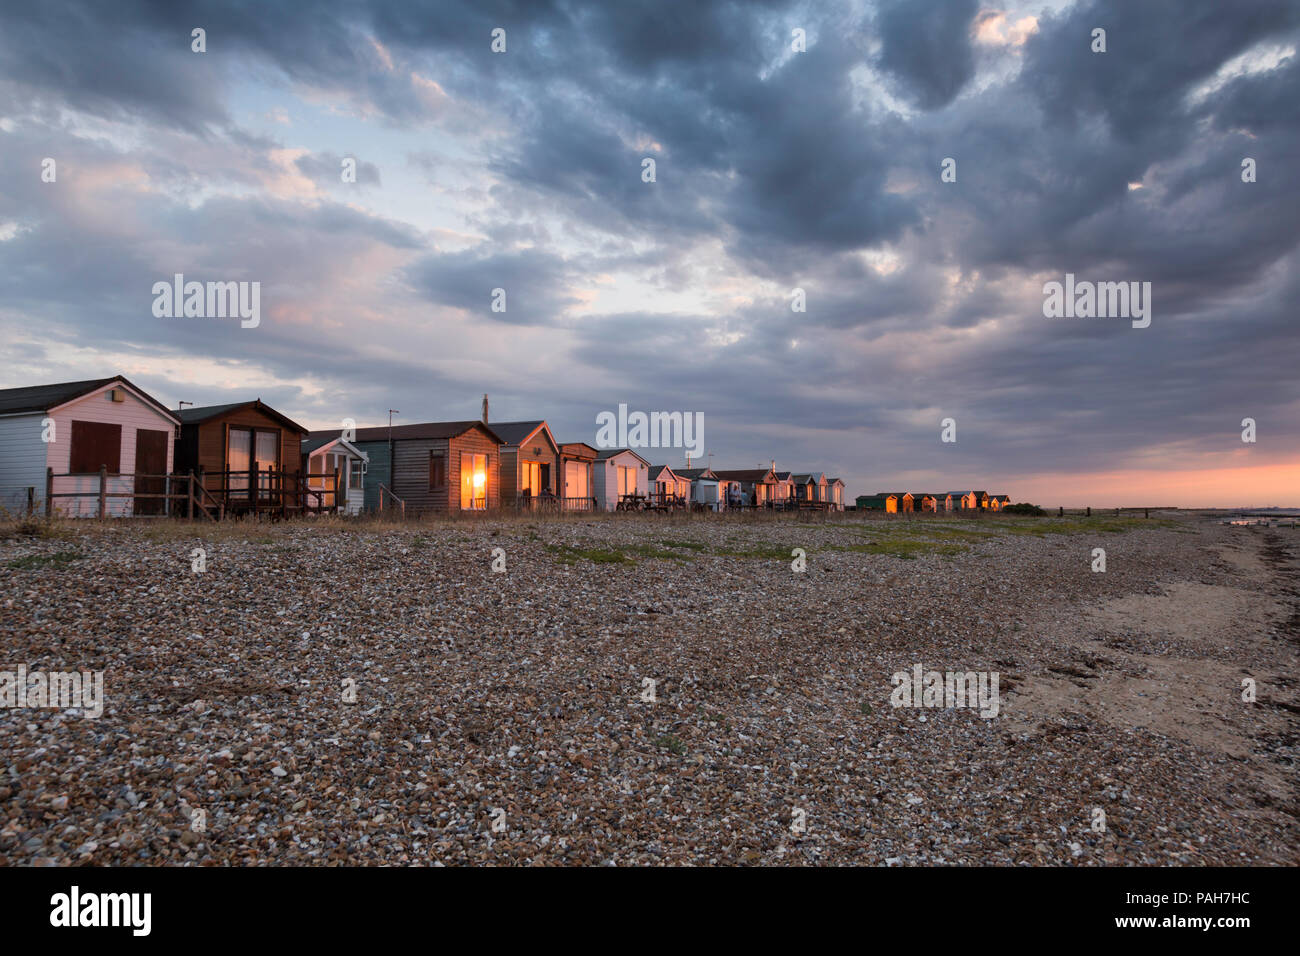 Golden sunset light shining on the beach huts by the shingle beach at Seasalter, Whitstable, Kent, UK. Dramatic clouds are seen above. Stock Photo